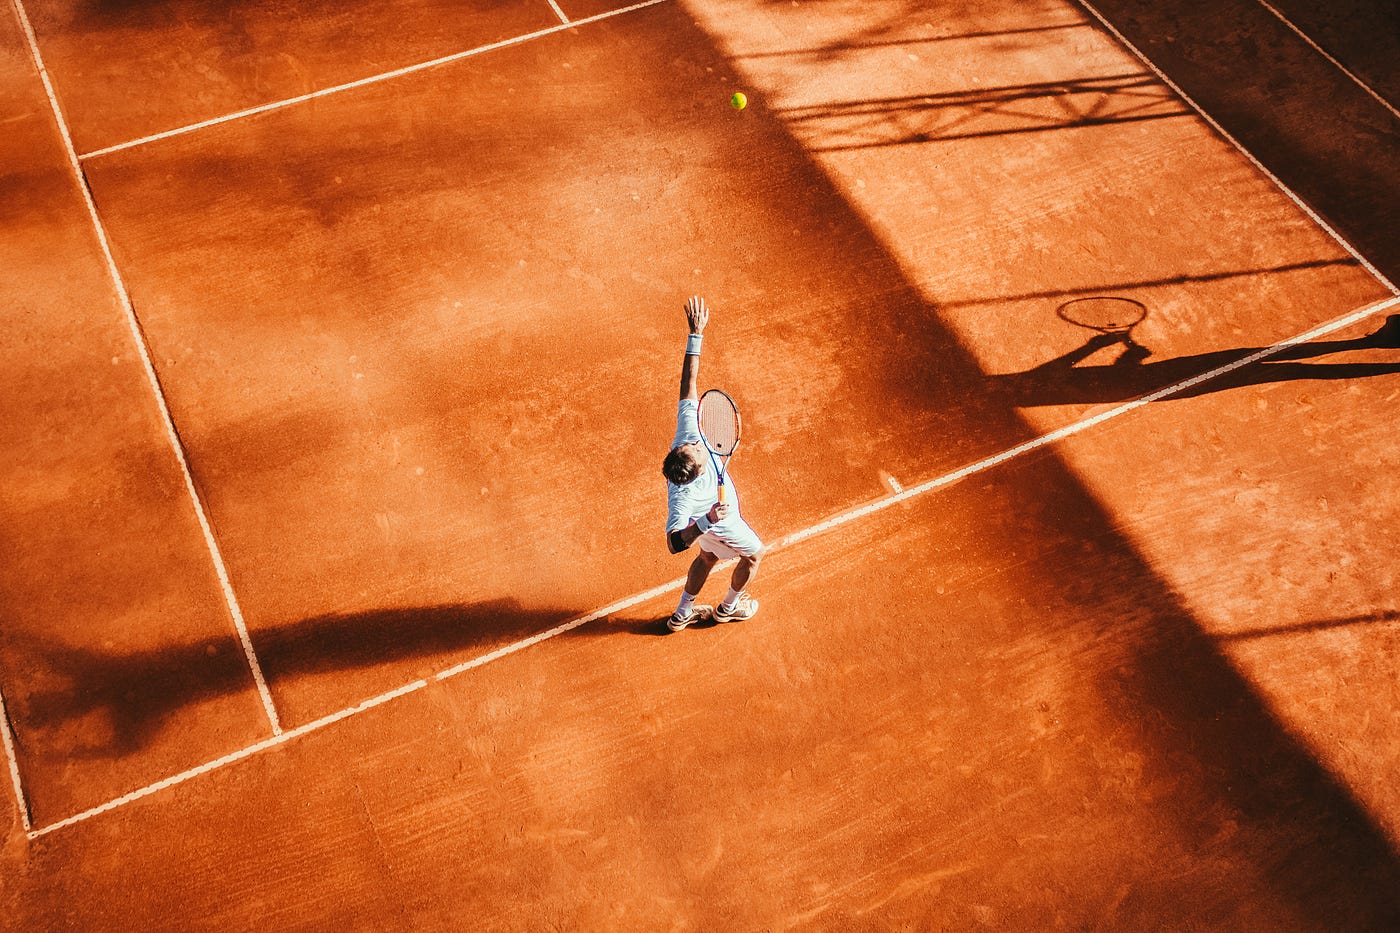 Modelling a Game of Tennis by Mark Jamison Towards Data Science